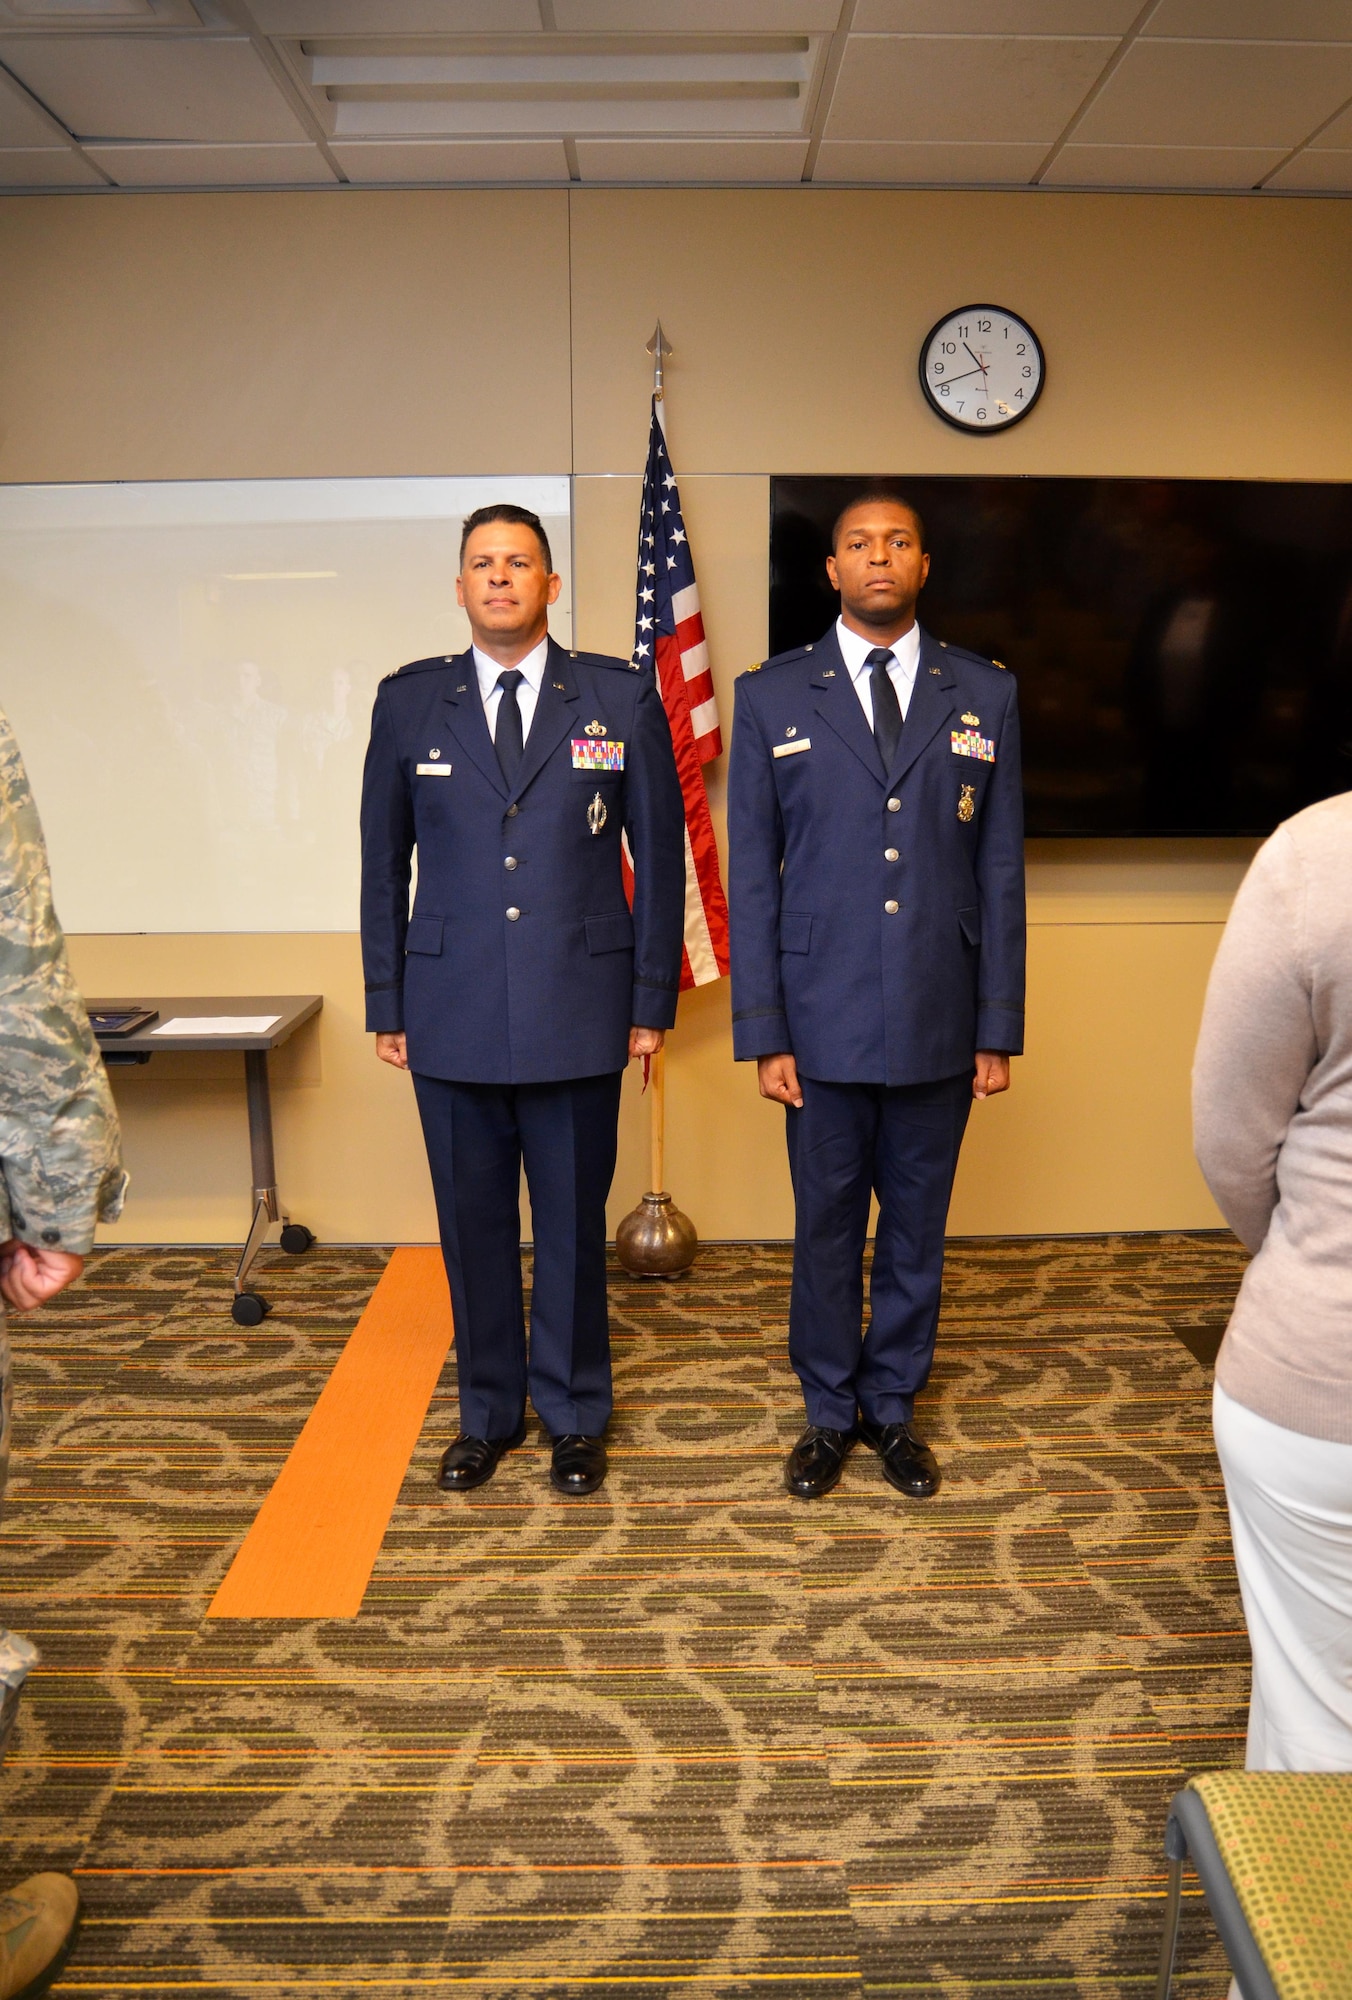 Lt. Col. Andre Wright, 94th Civil Engineer Squadron commander, and Col. Marty Hughes, 94th Mission Support Group commander, stand tall at attention during the Air Force Song. Many civil engineer Airmen came in support of Wright’s promotion. (U.S. Air Force photo by Senior Airman Lauren Douglas)